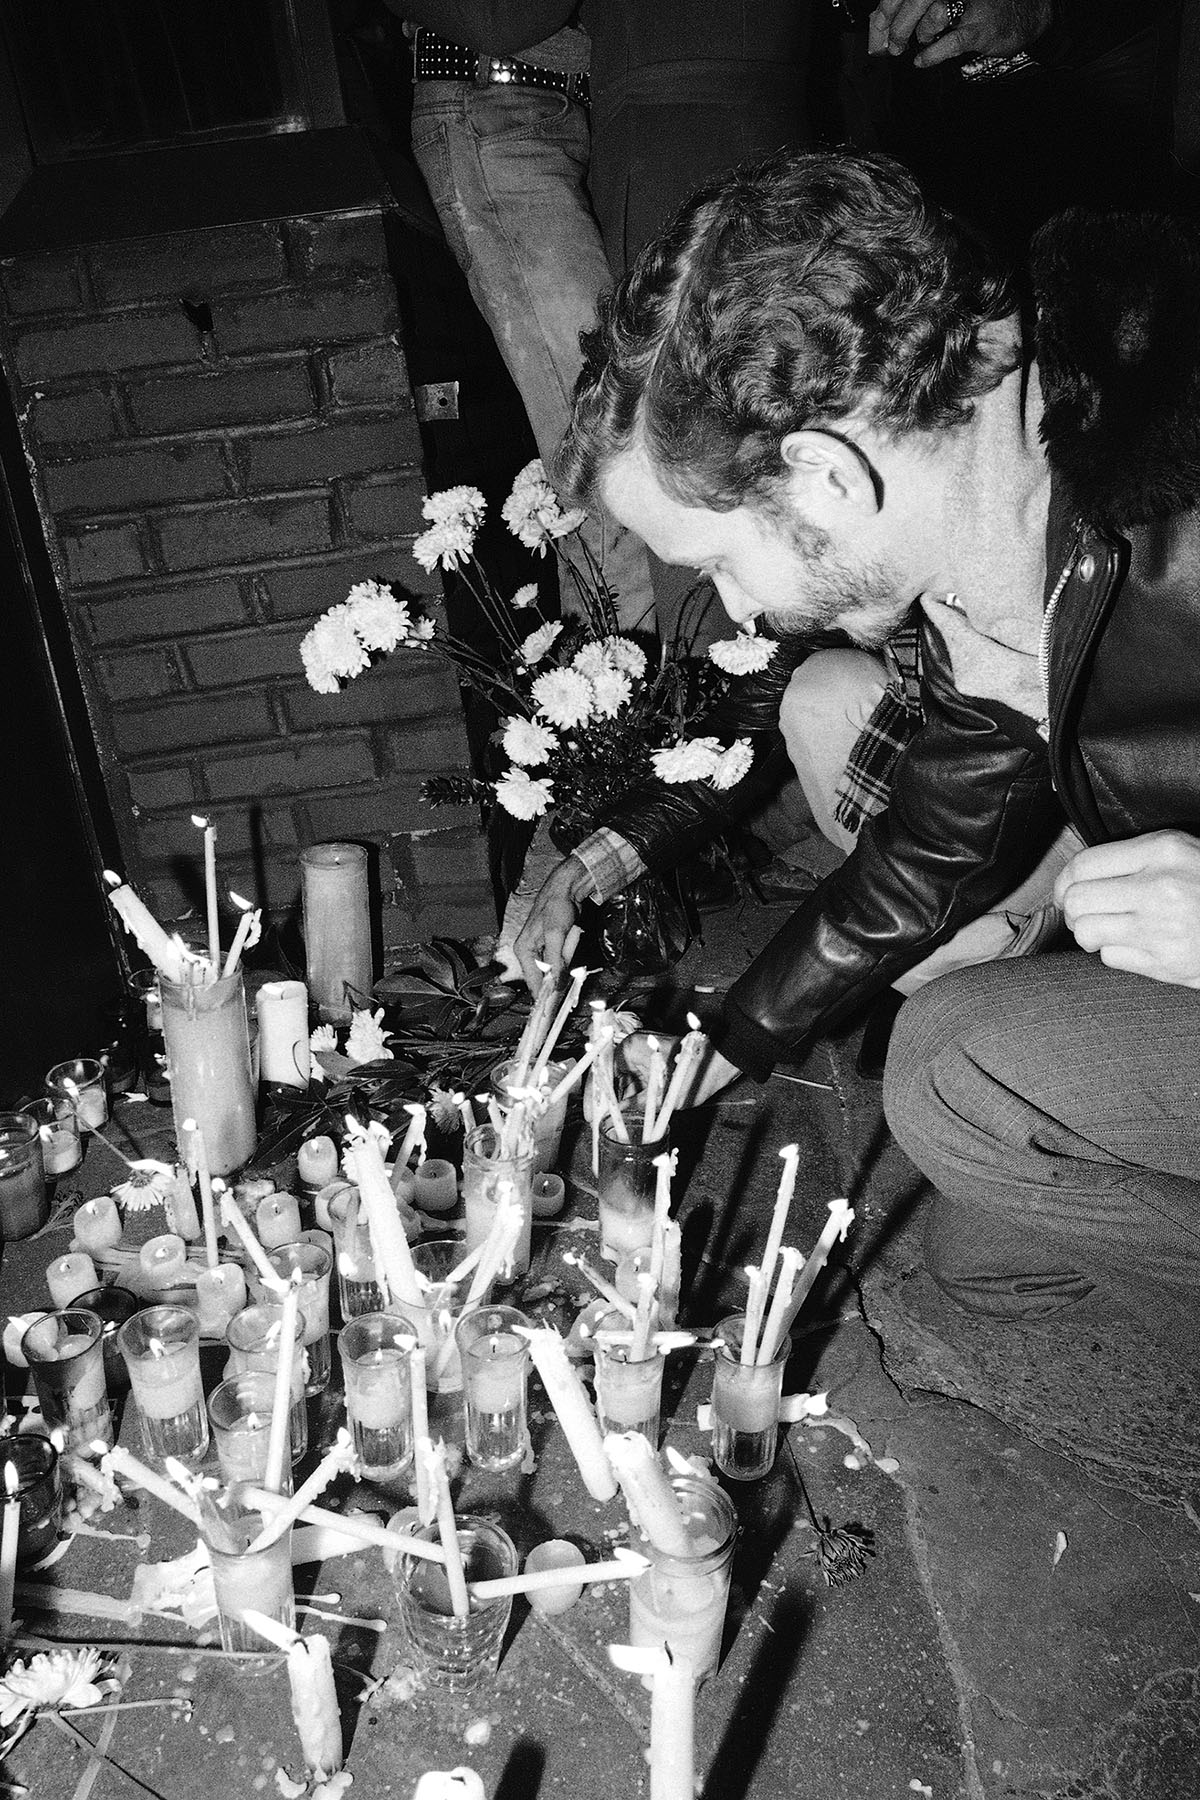 A man places a memorial candle in front of the Ramrod Bar in New York City. Dozen of candles and flowers are on the ground.